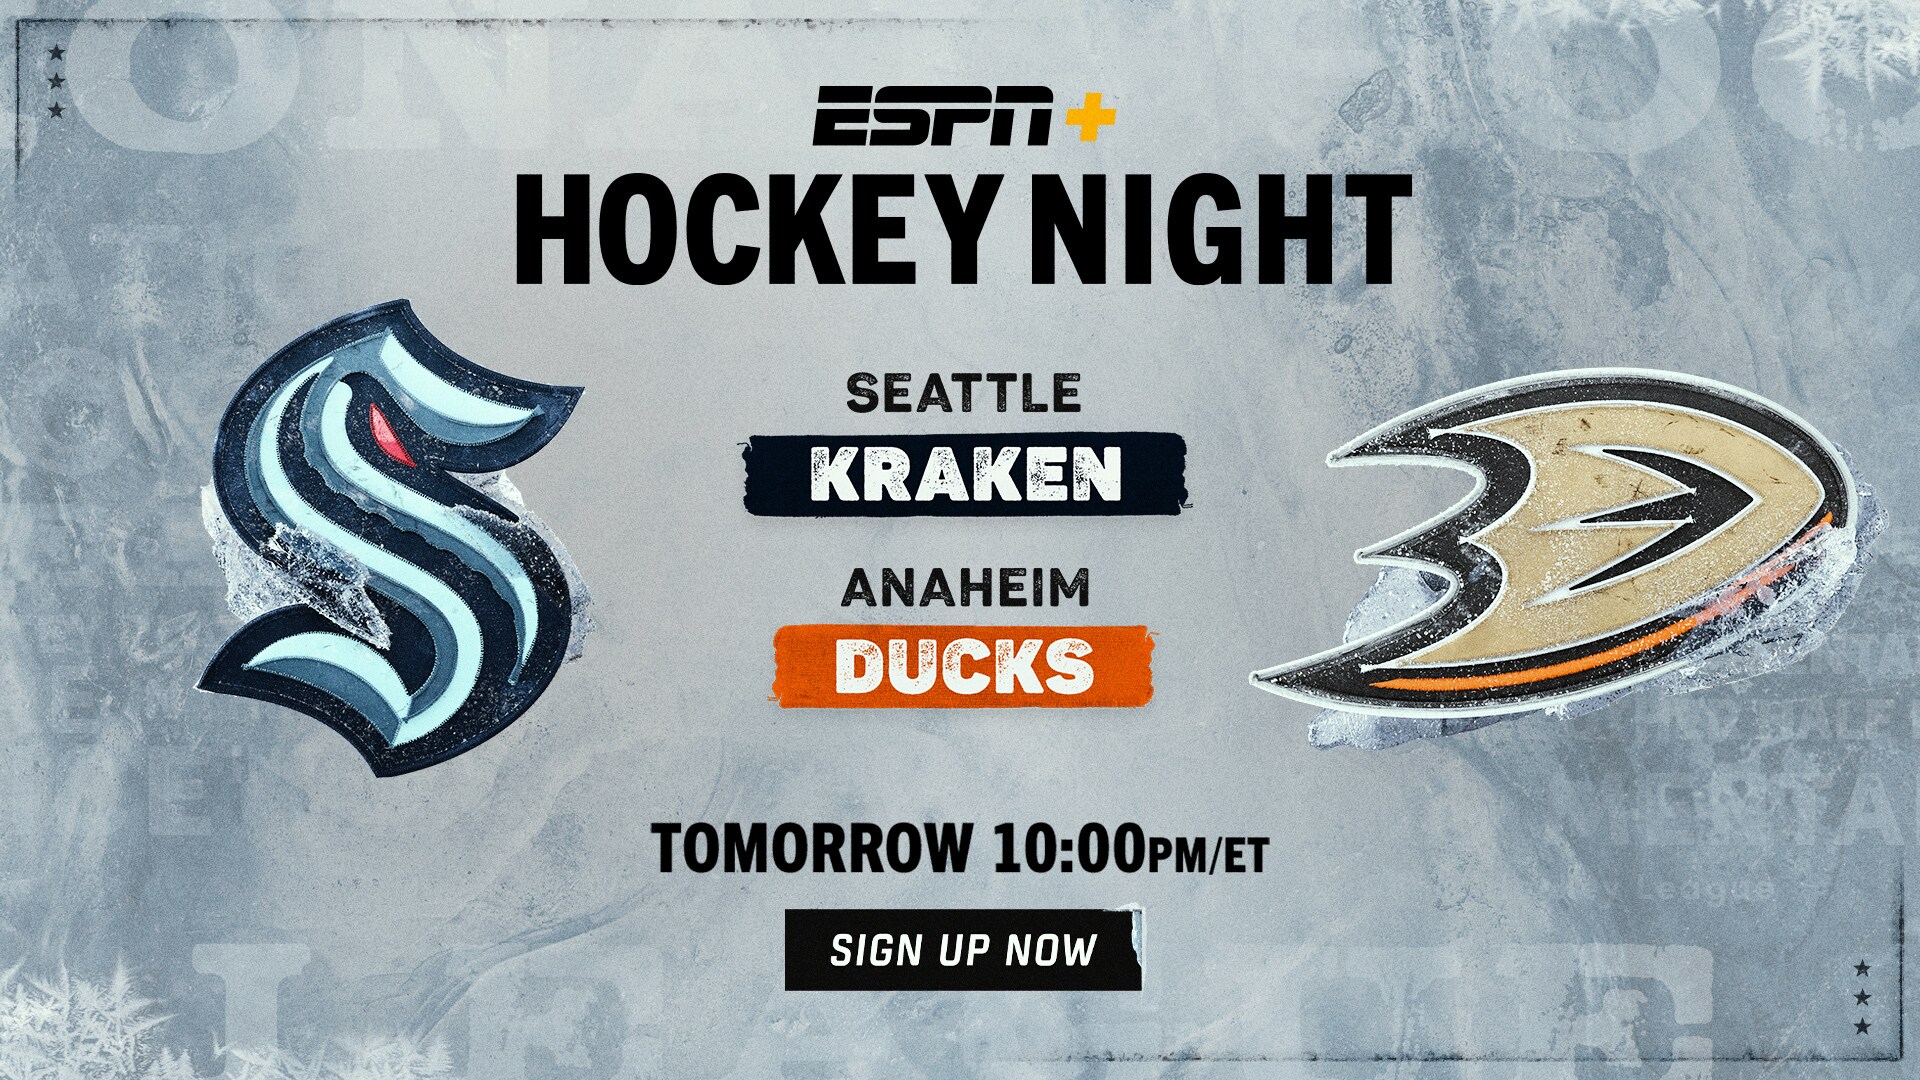 Exclusively on ESPN+ and Hulu: National Hockey League’s Seattle Kraken Face Off with the Anaheim Ducks on Friday, February 11